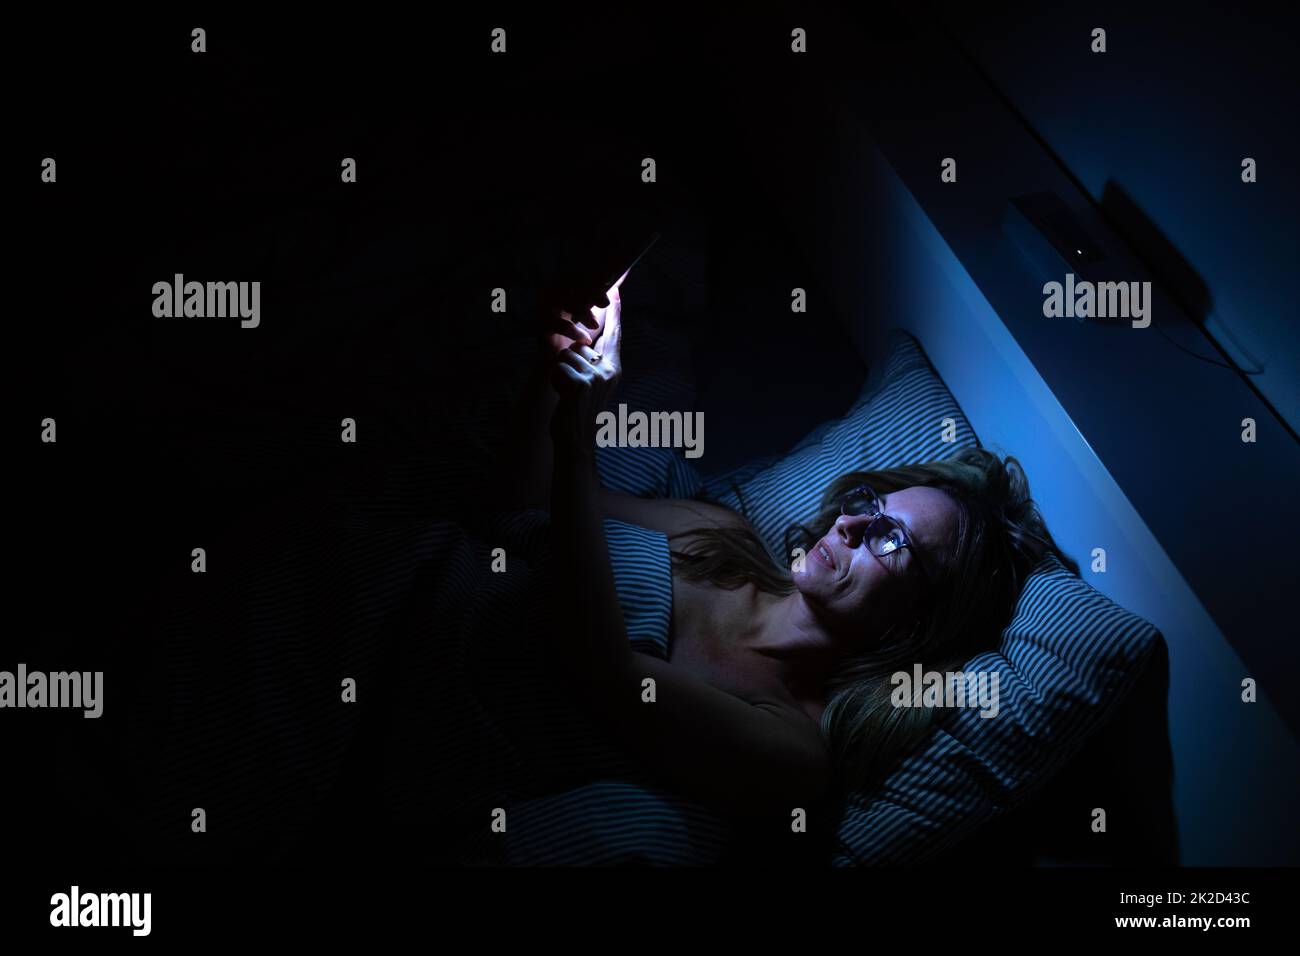 Pretty, middle-aged woman using her cell phone in bed at night - unhealthy blue light exposure Stock Photo